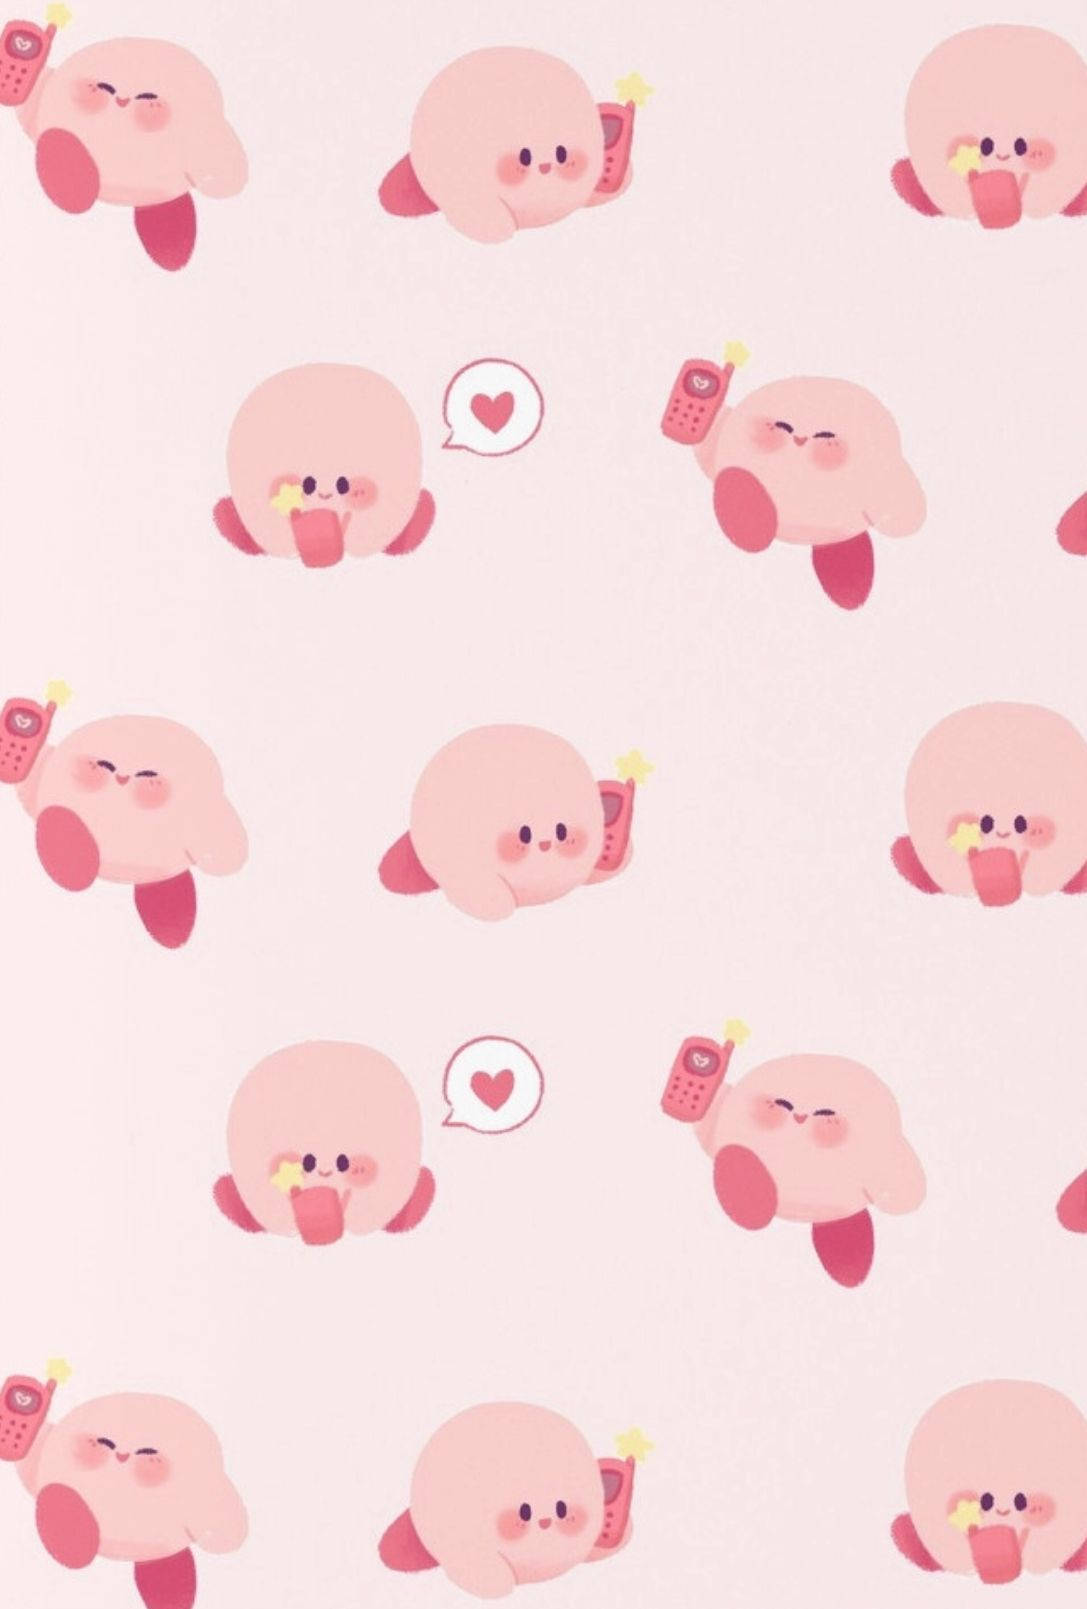 Take a journey with Kirby into the magical world of pink! Wallpaper